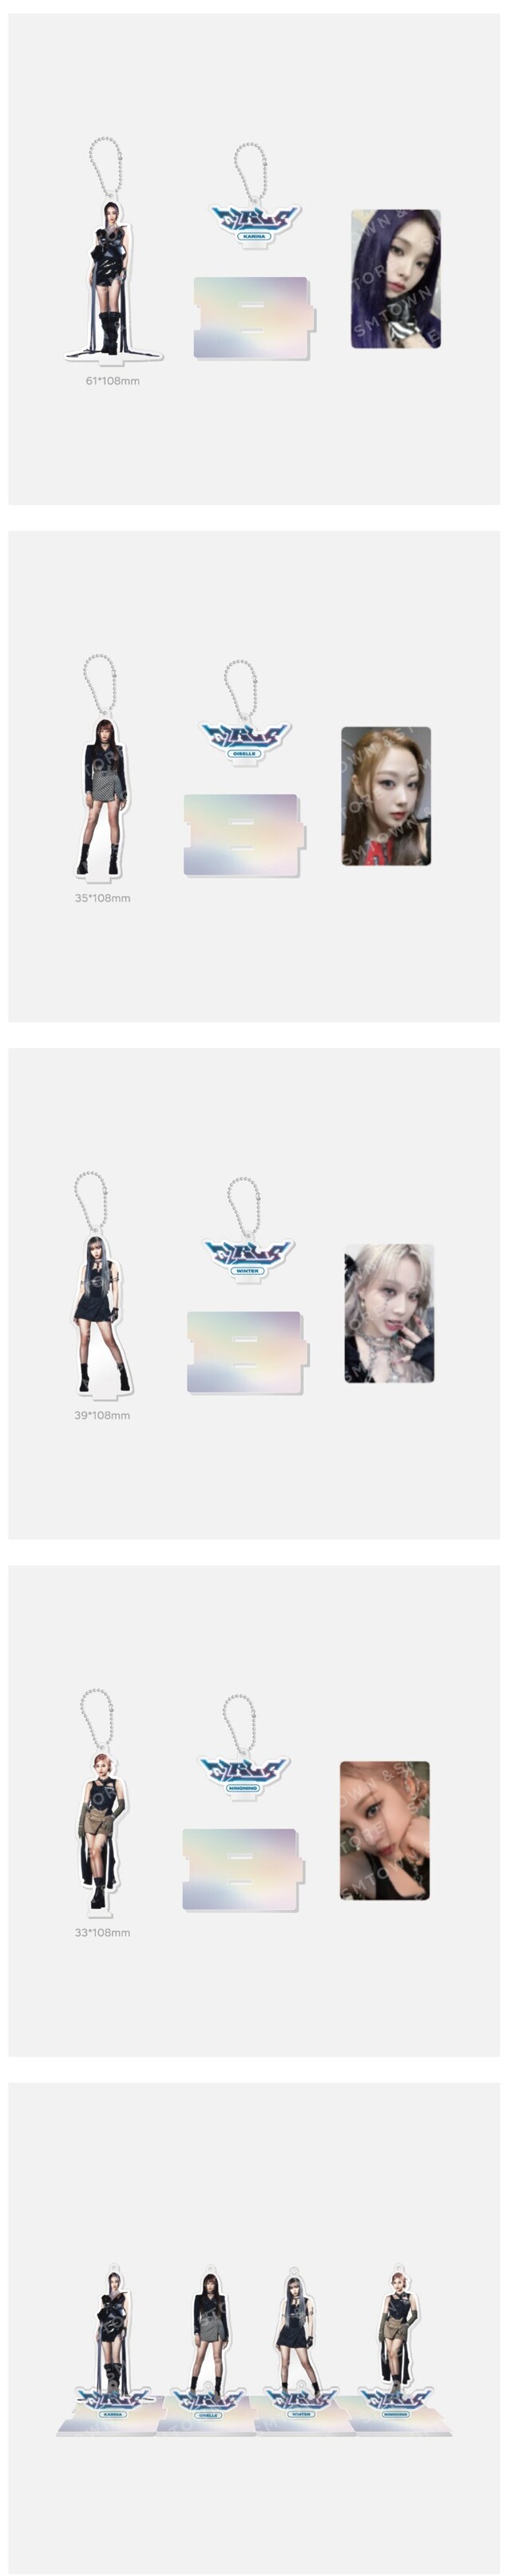 aespa Girls SMTOWN OFFICIAL MD GOODS ACRYLIC STAND KEY RING +